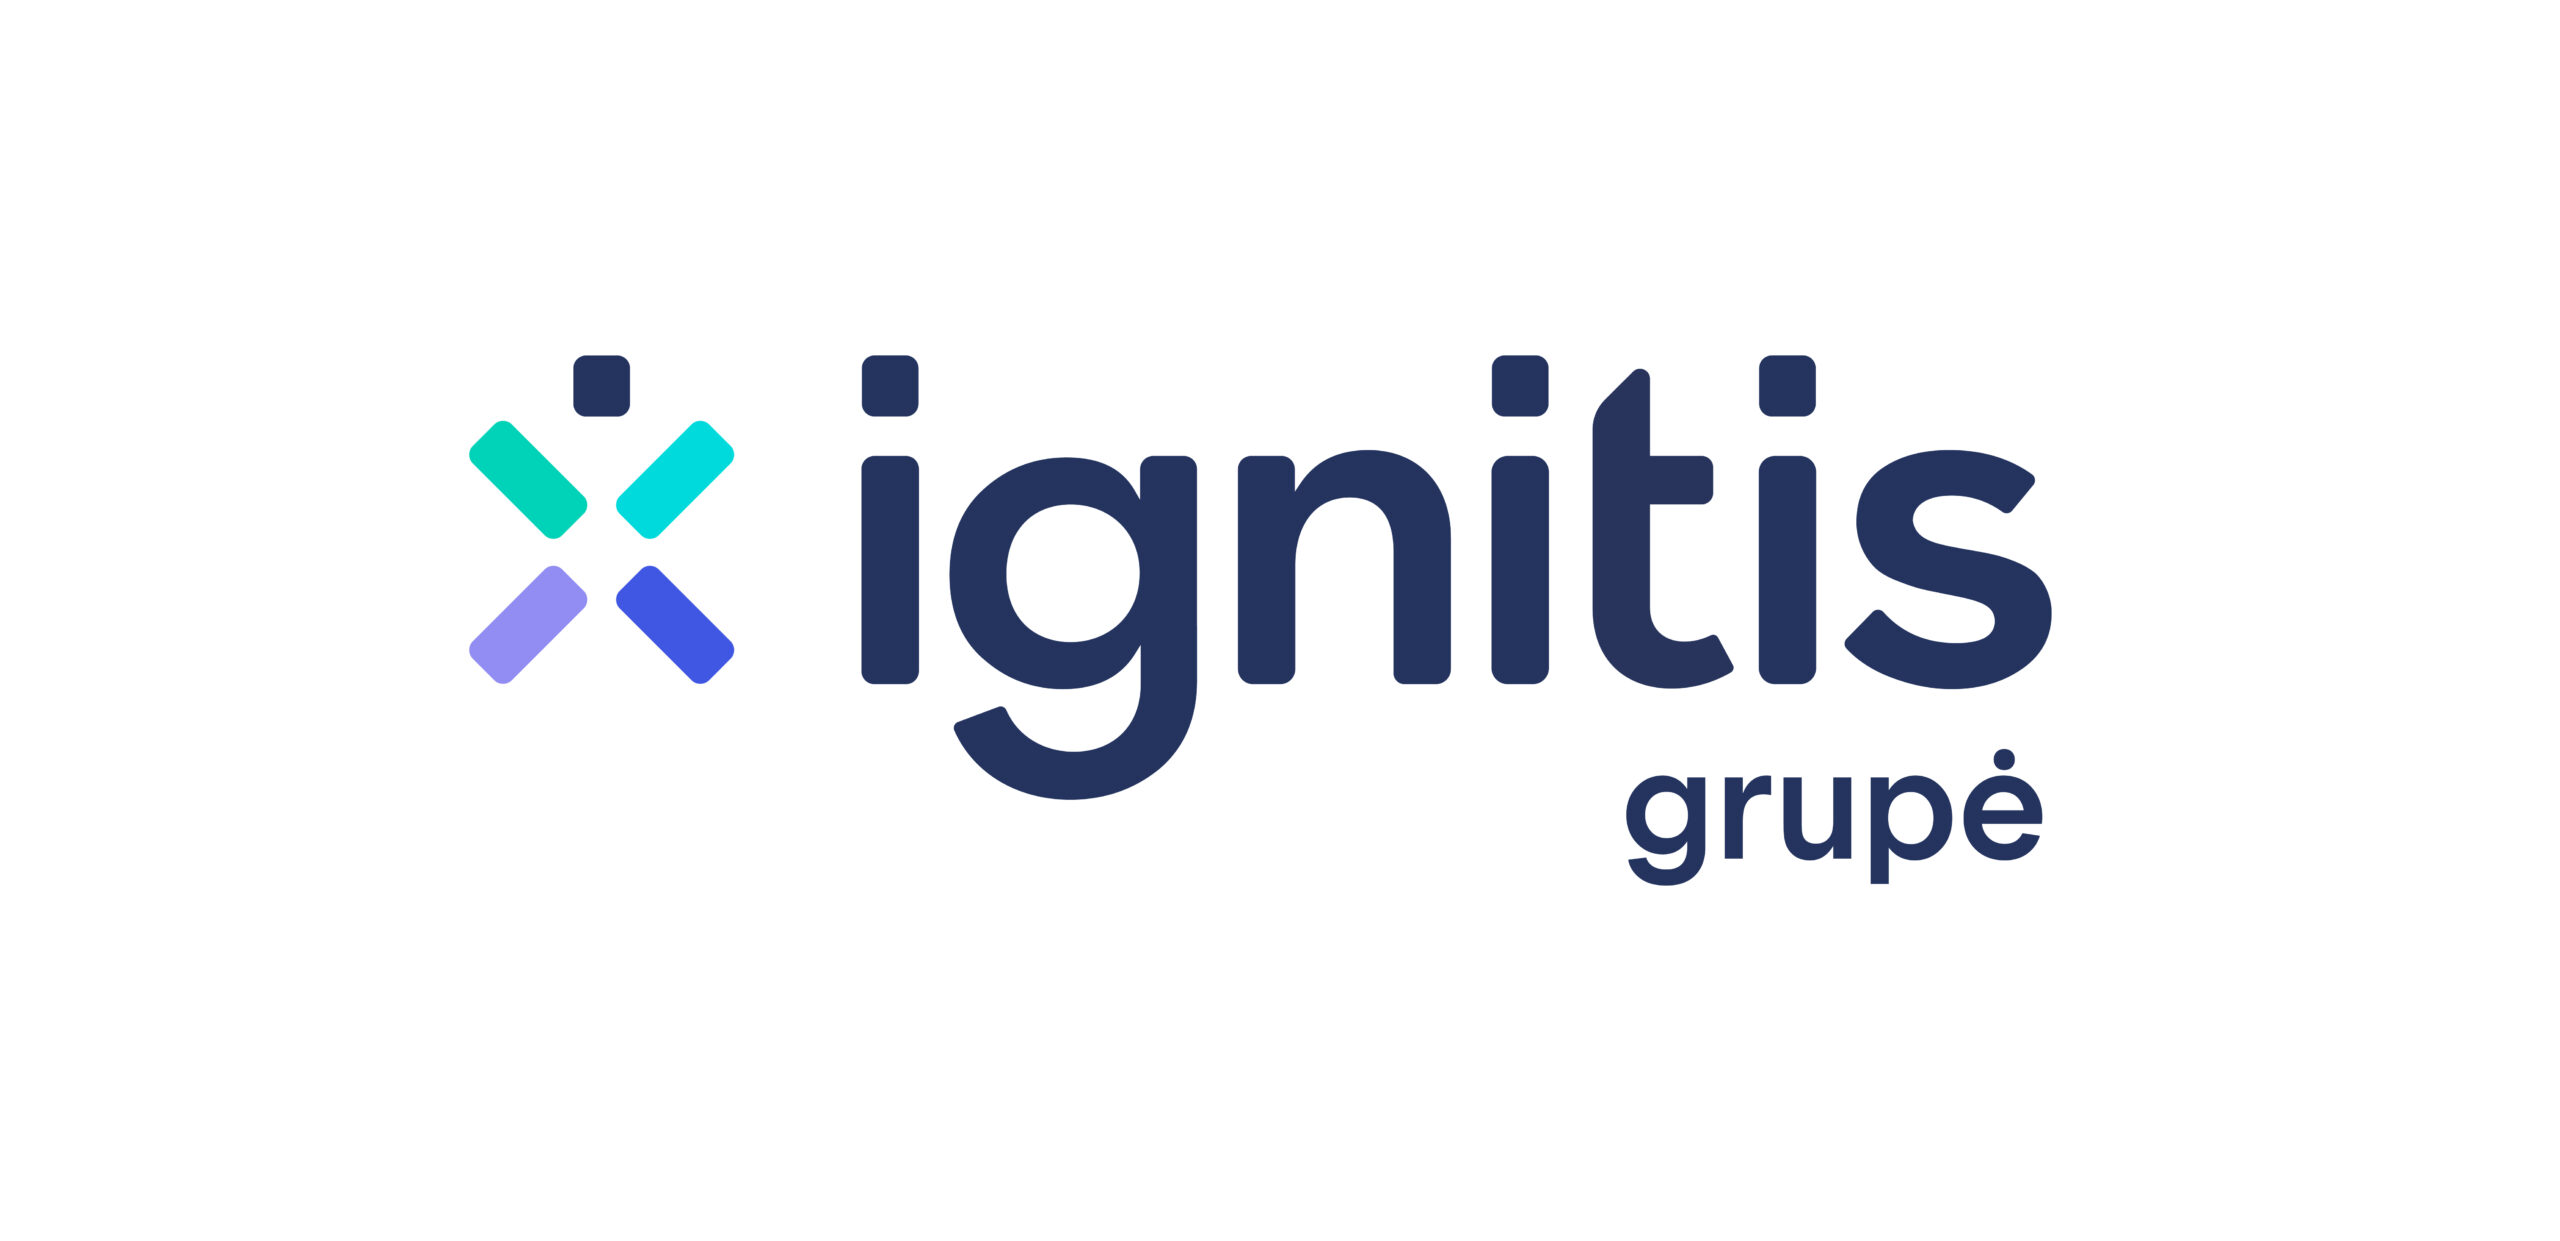 More information about the Ignitis grupė